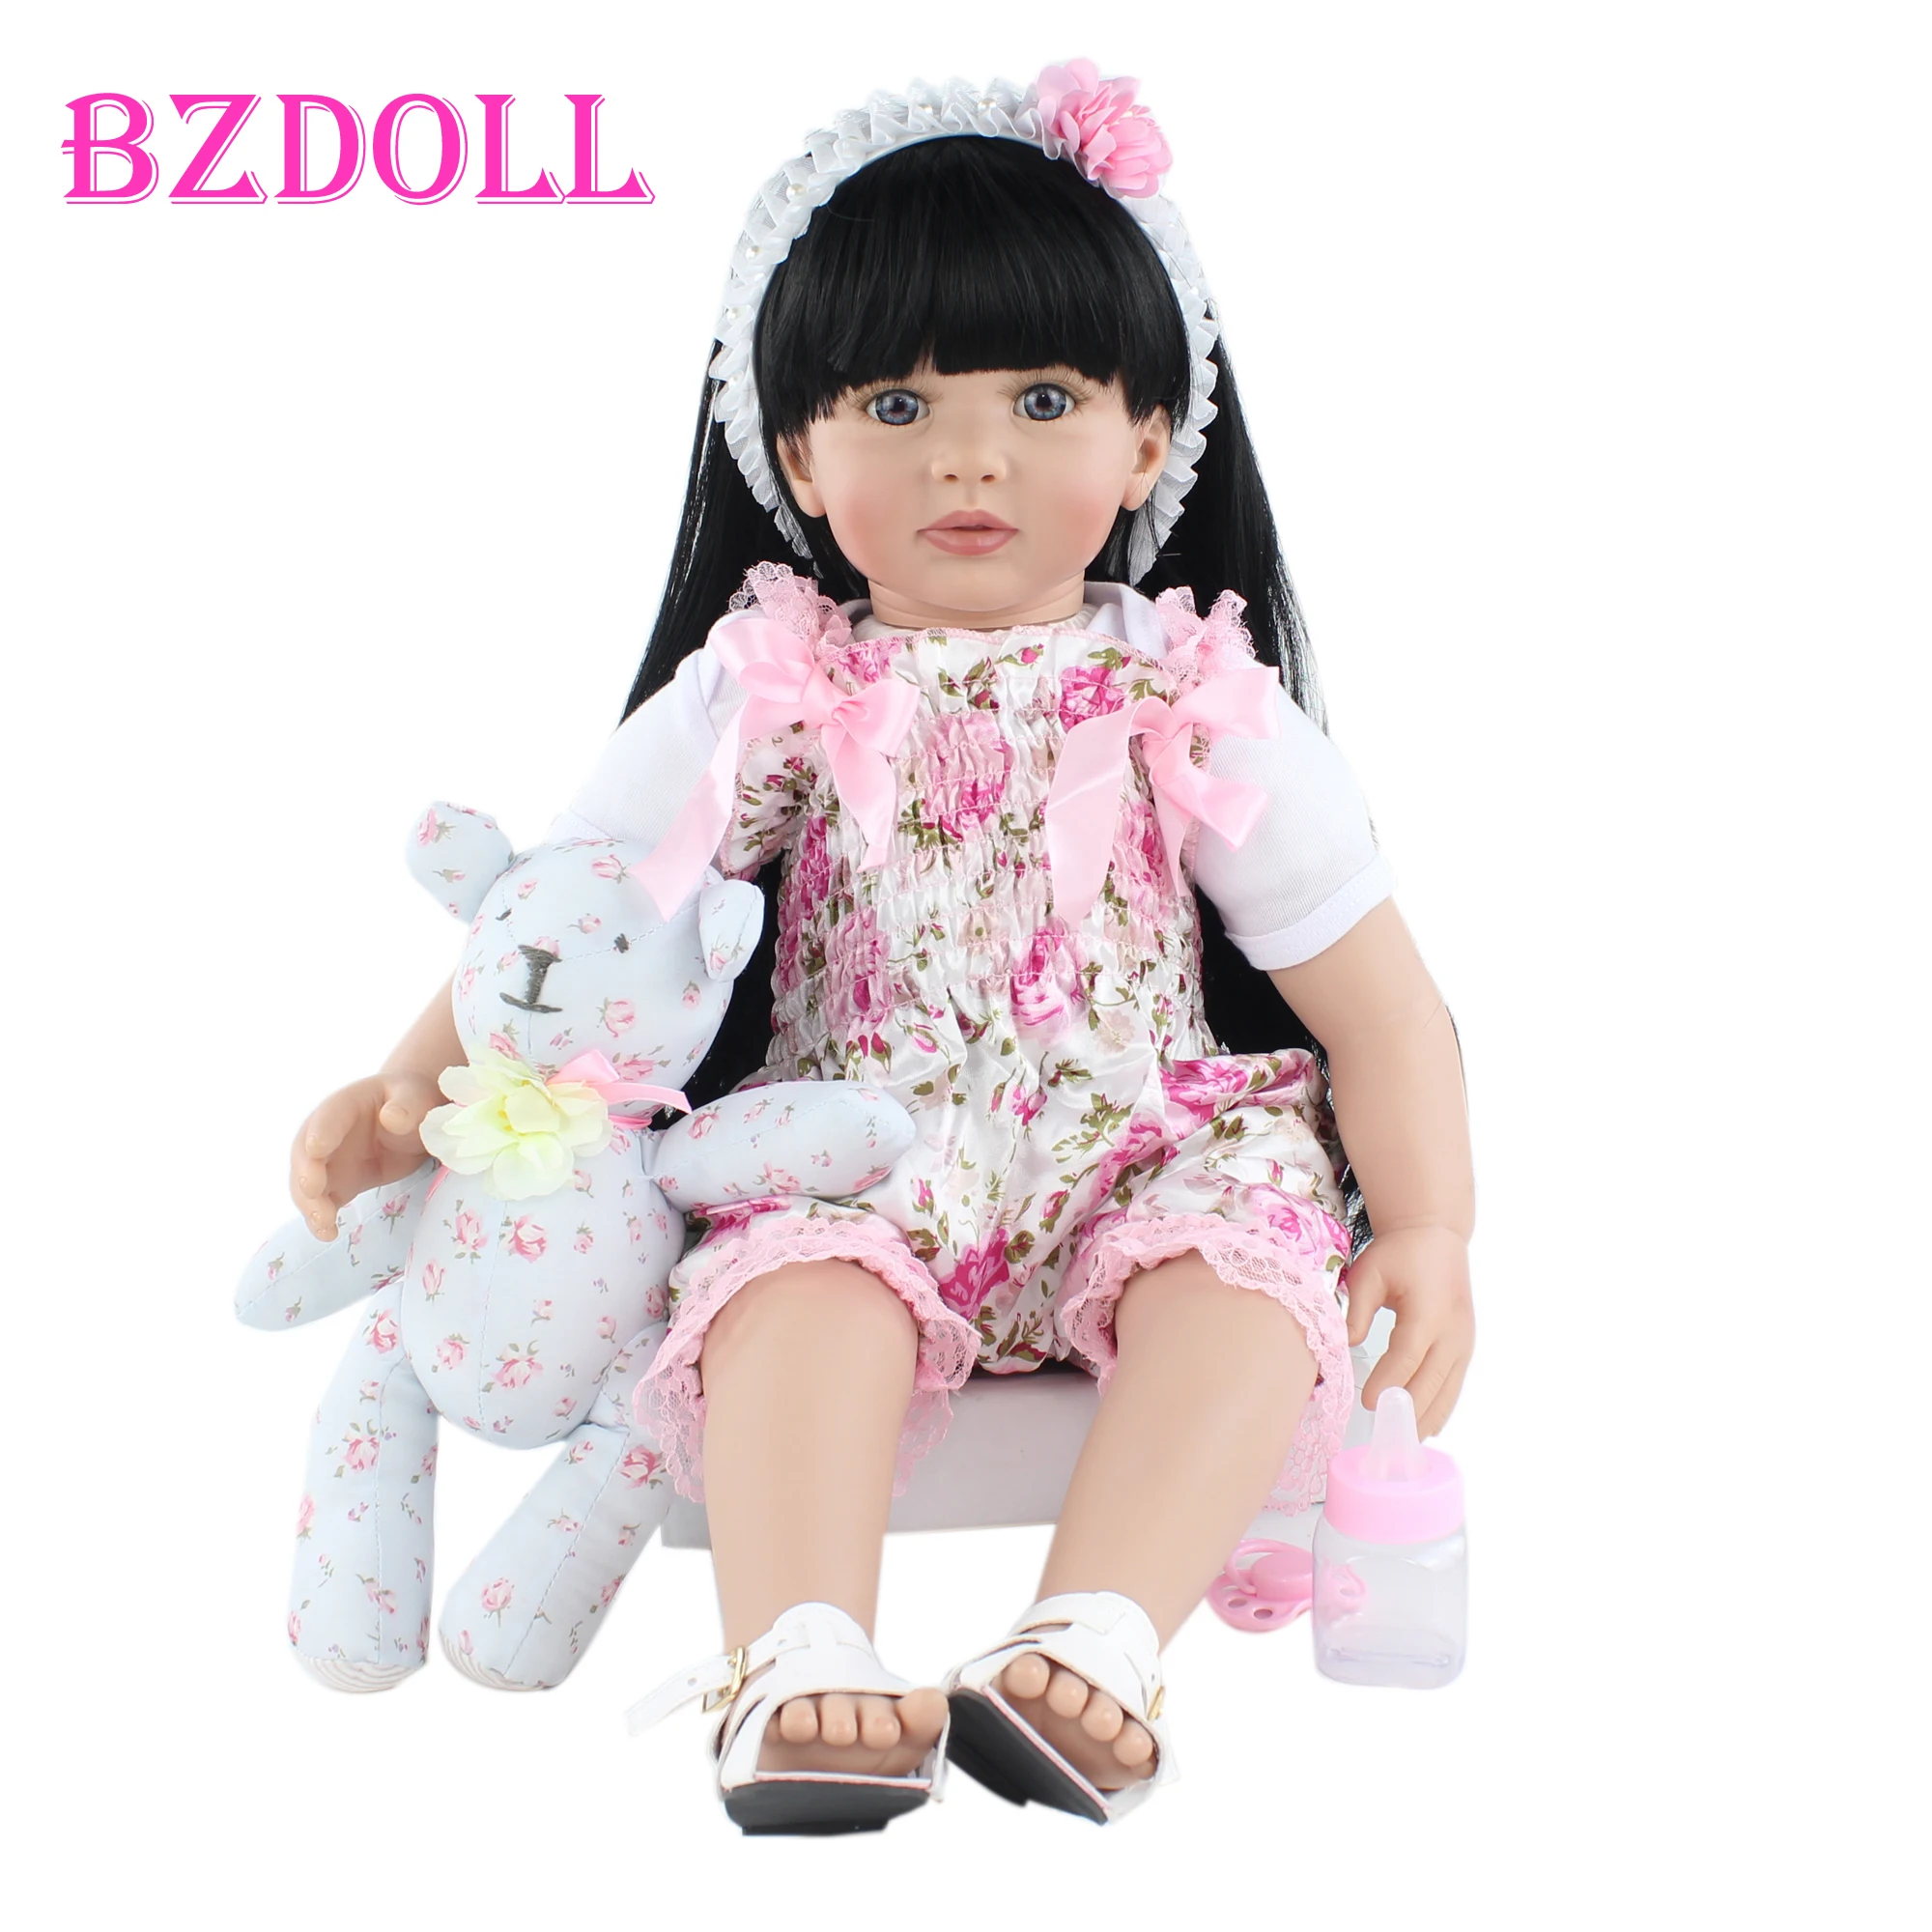 

60cm Soft Silicone Reborn Toddler Baby Doll Toys For Girl Black Long Hair Princess Bebe With Bear Plush Kids Birthday Gift